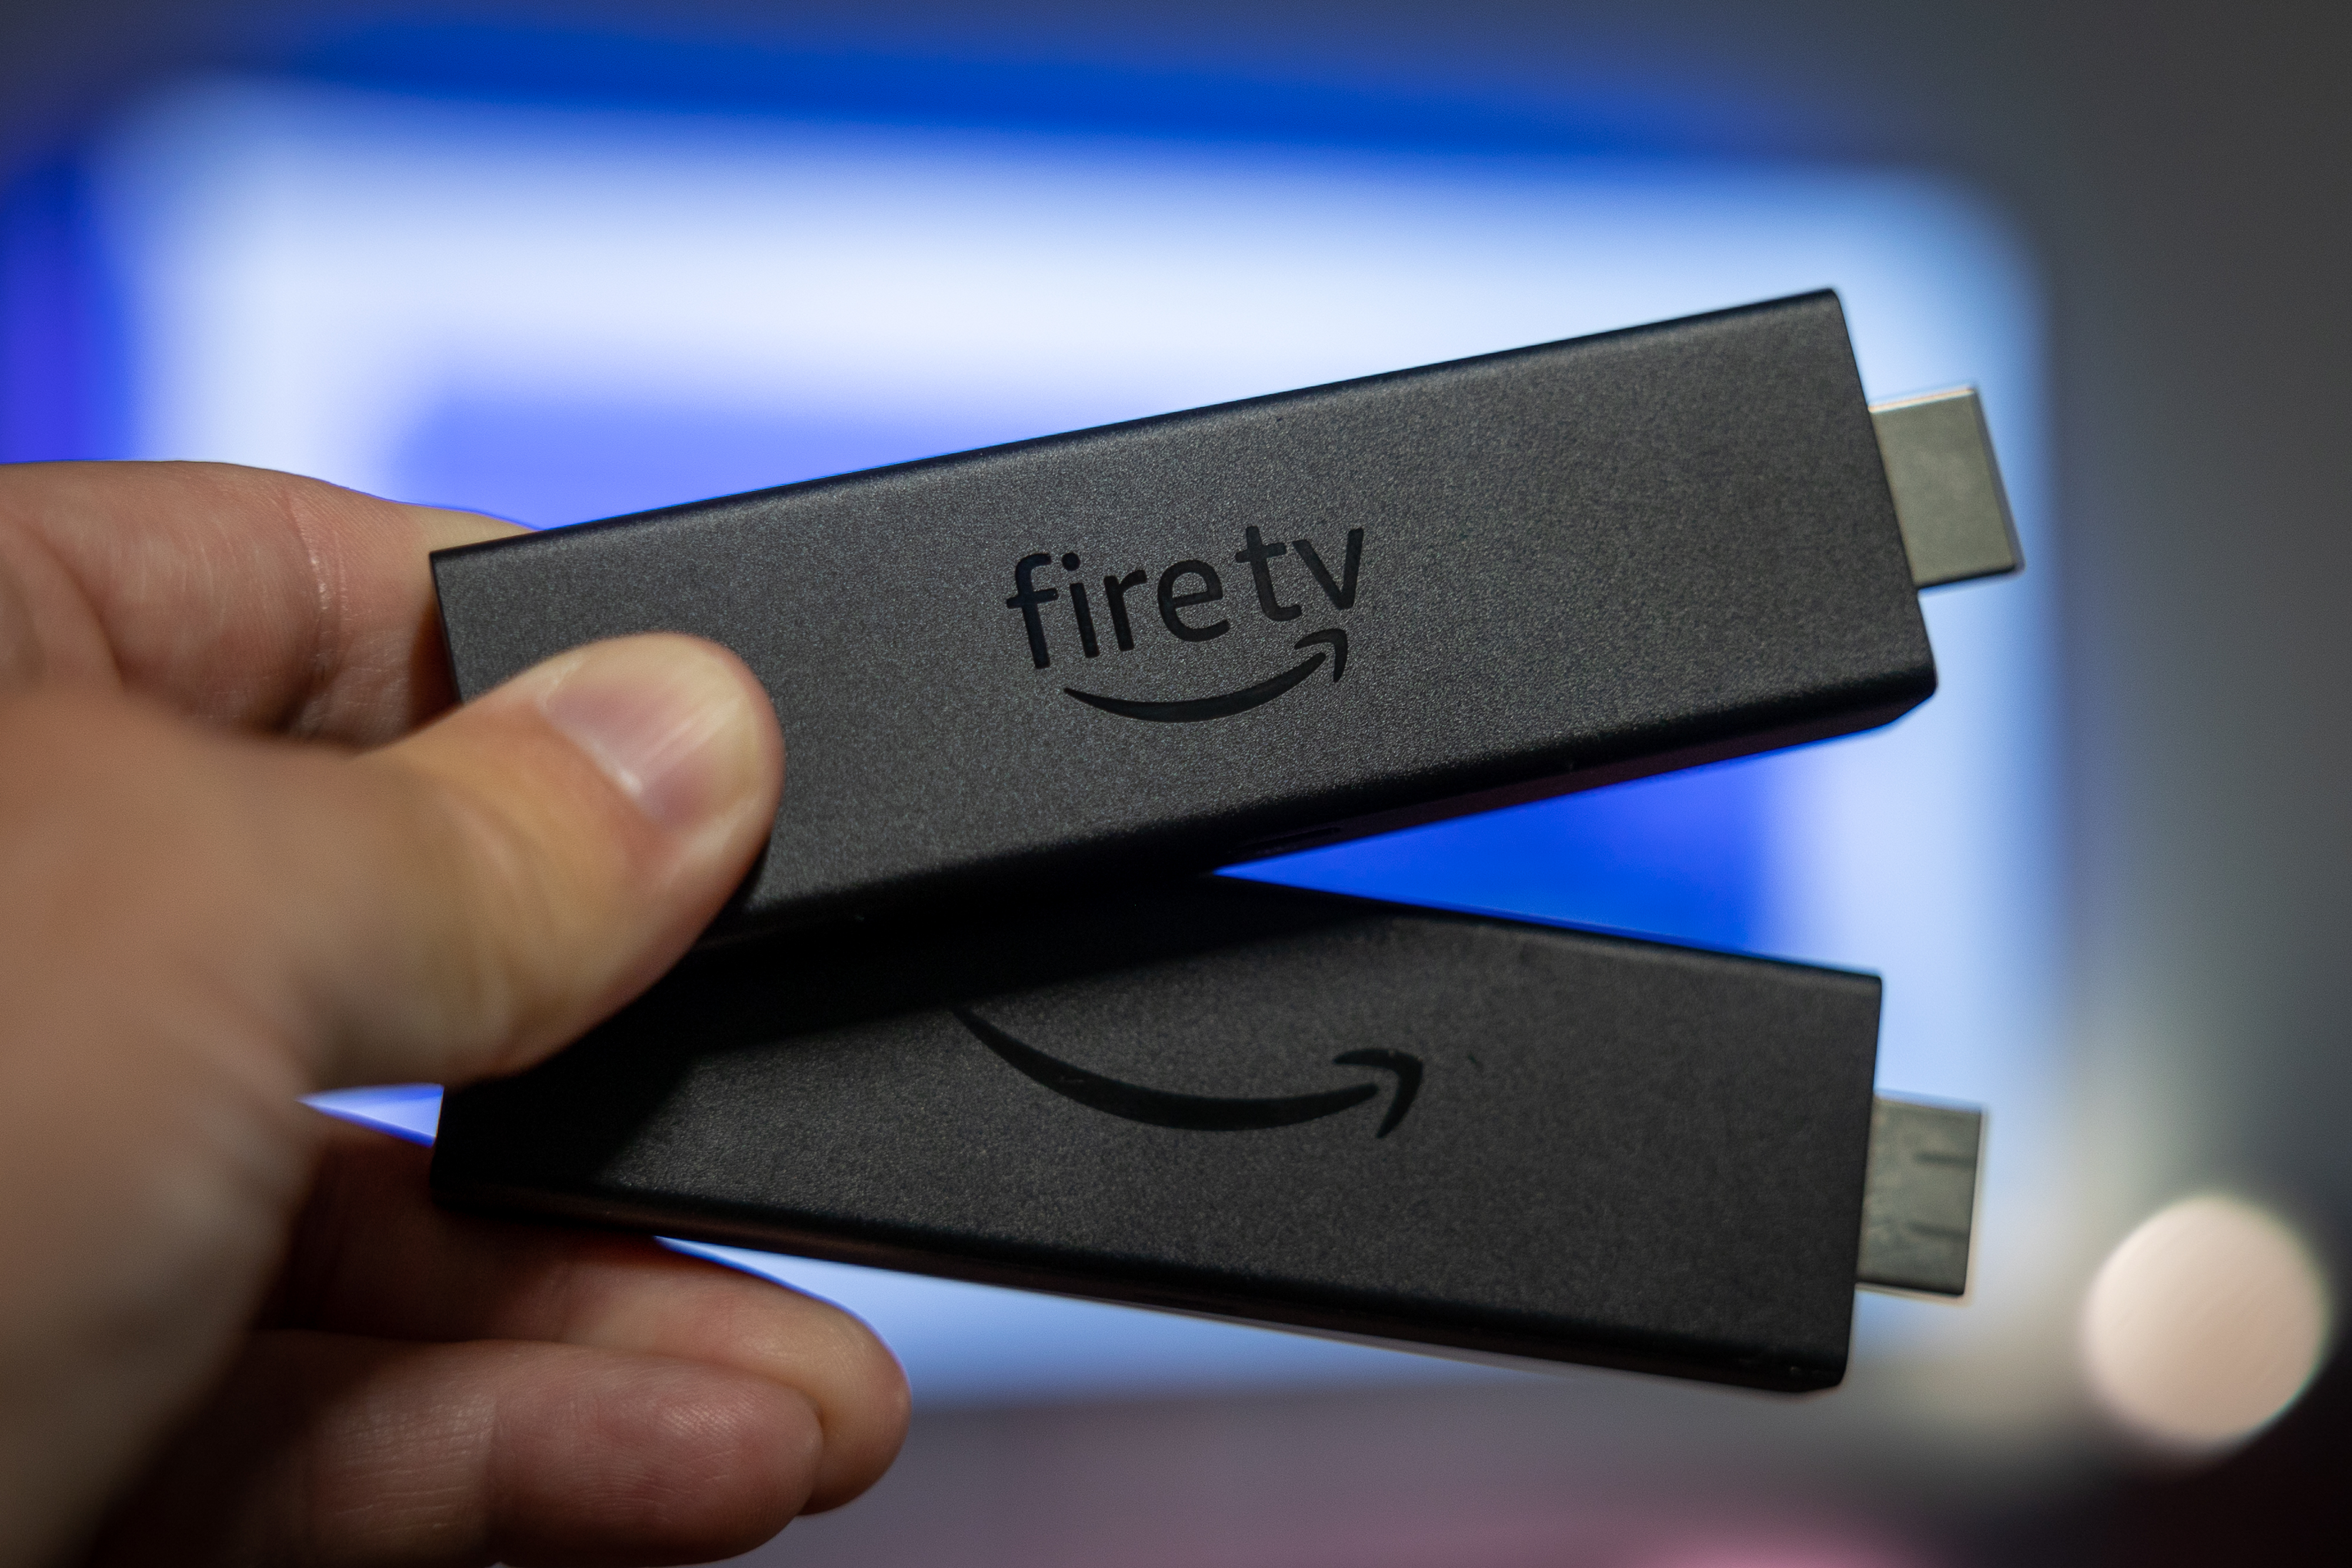 How to AirPlay to a Fire Stick or Fire TV: 3 Awesome Tricks